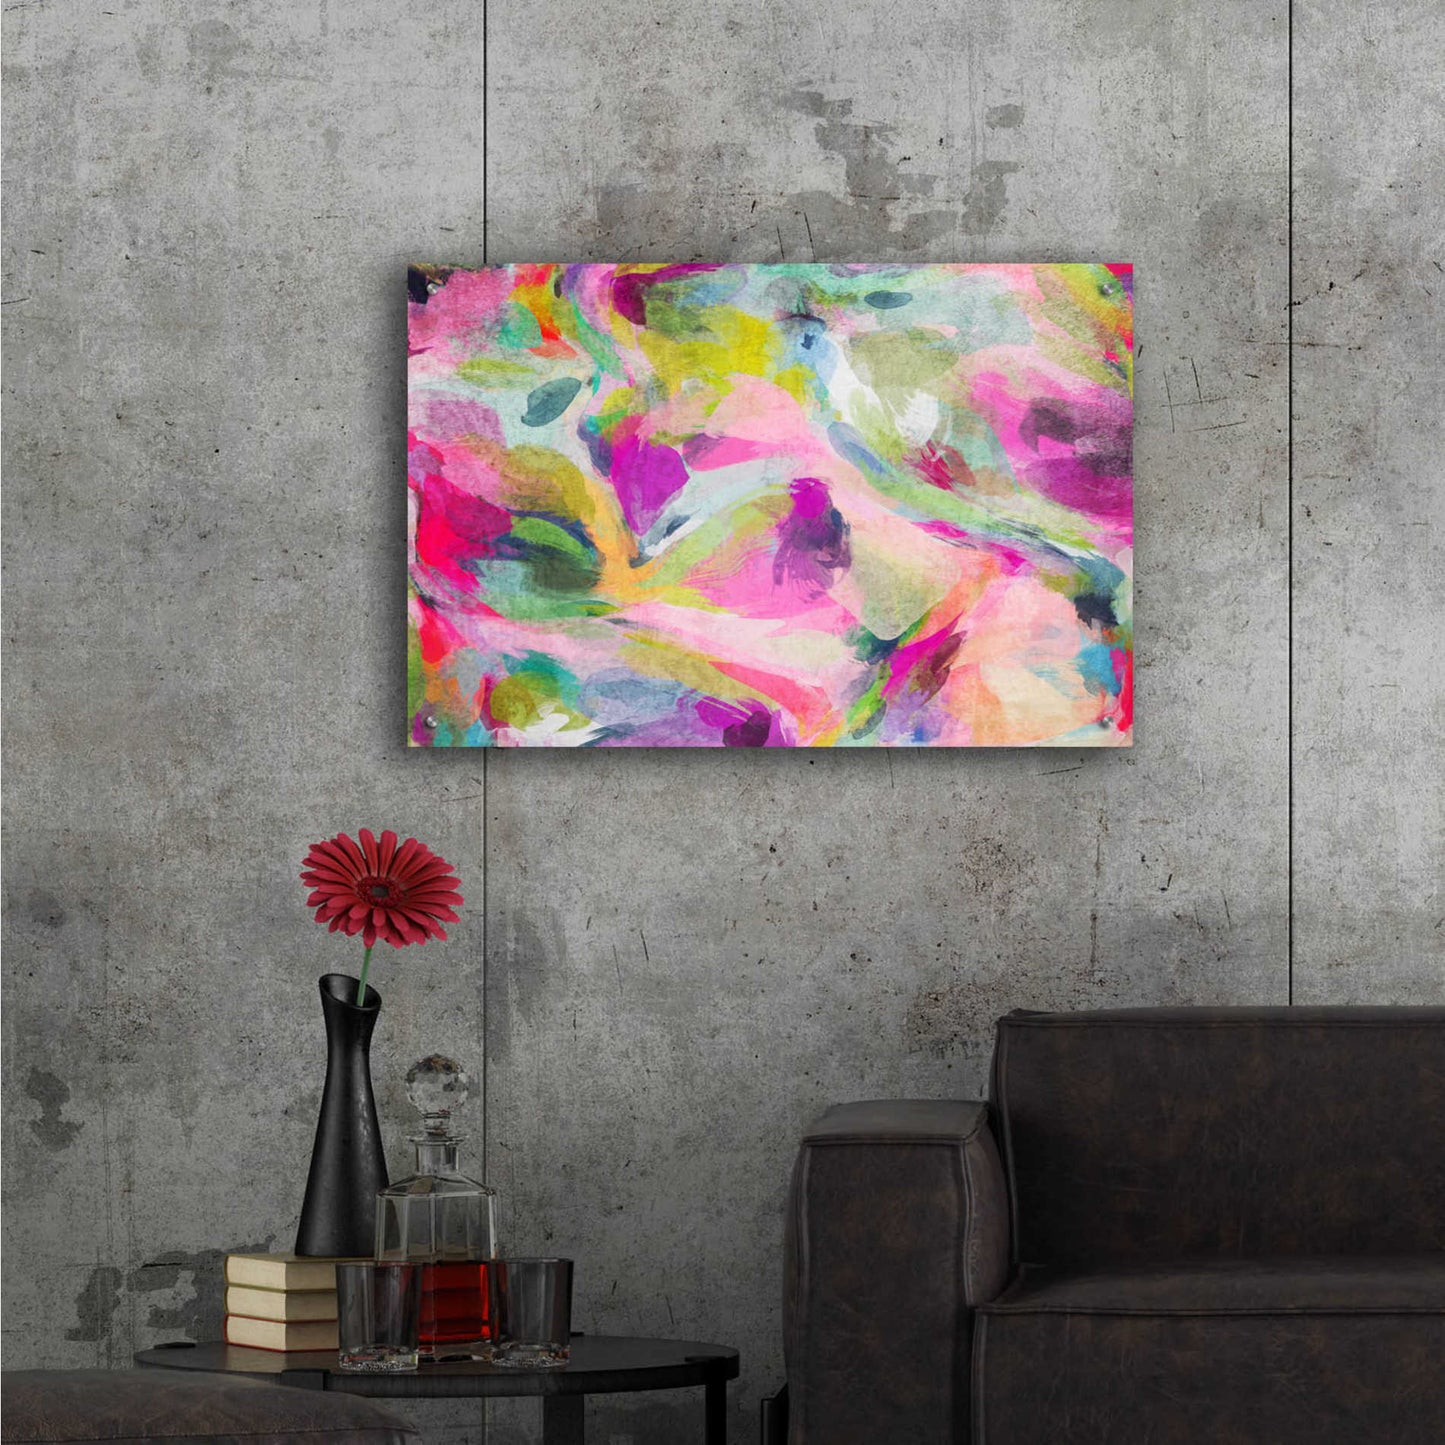 Epic Art 'Abstract Colorful Flows 3' by Irena Orlov Acrylic Glass Wall Art,36x24